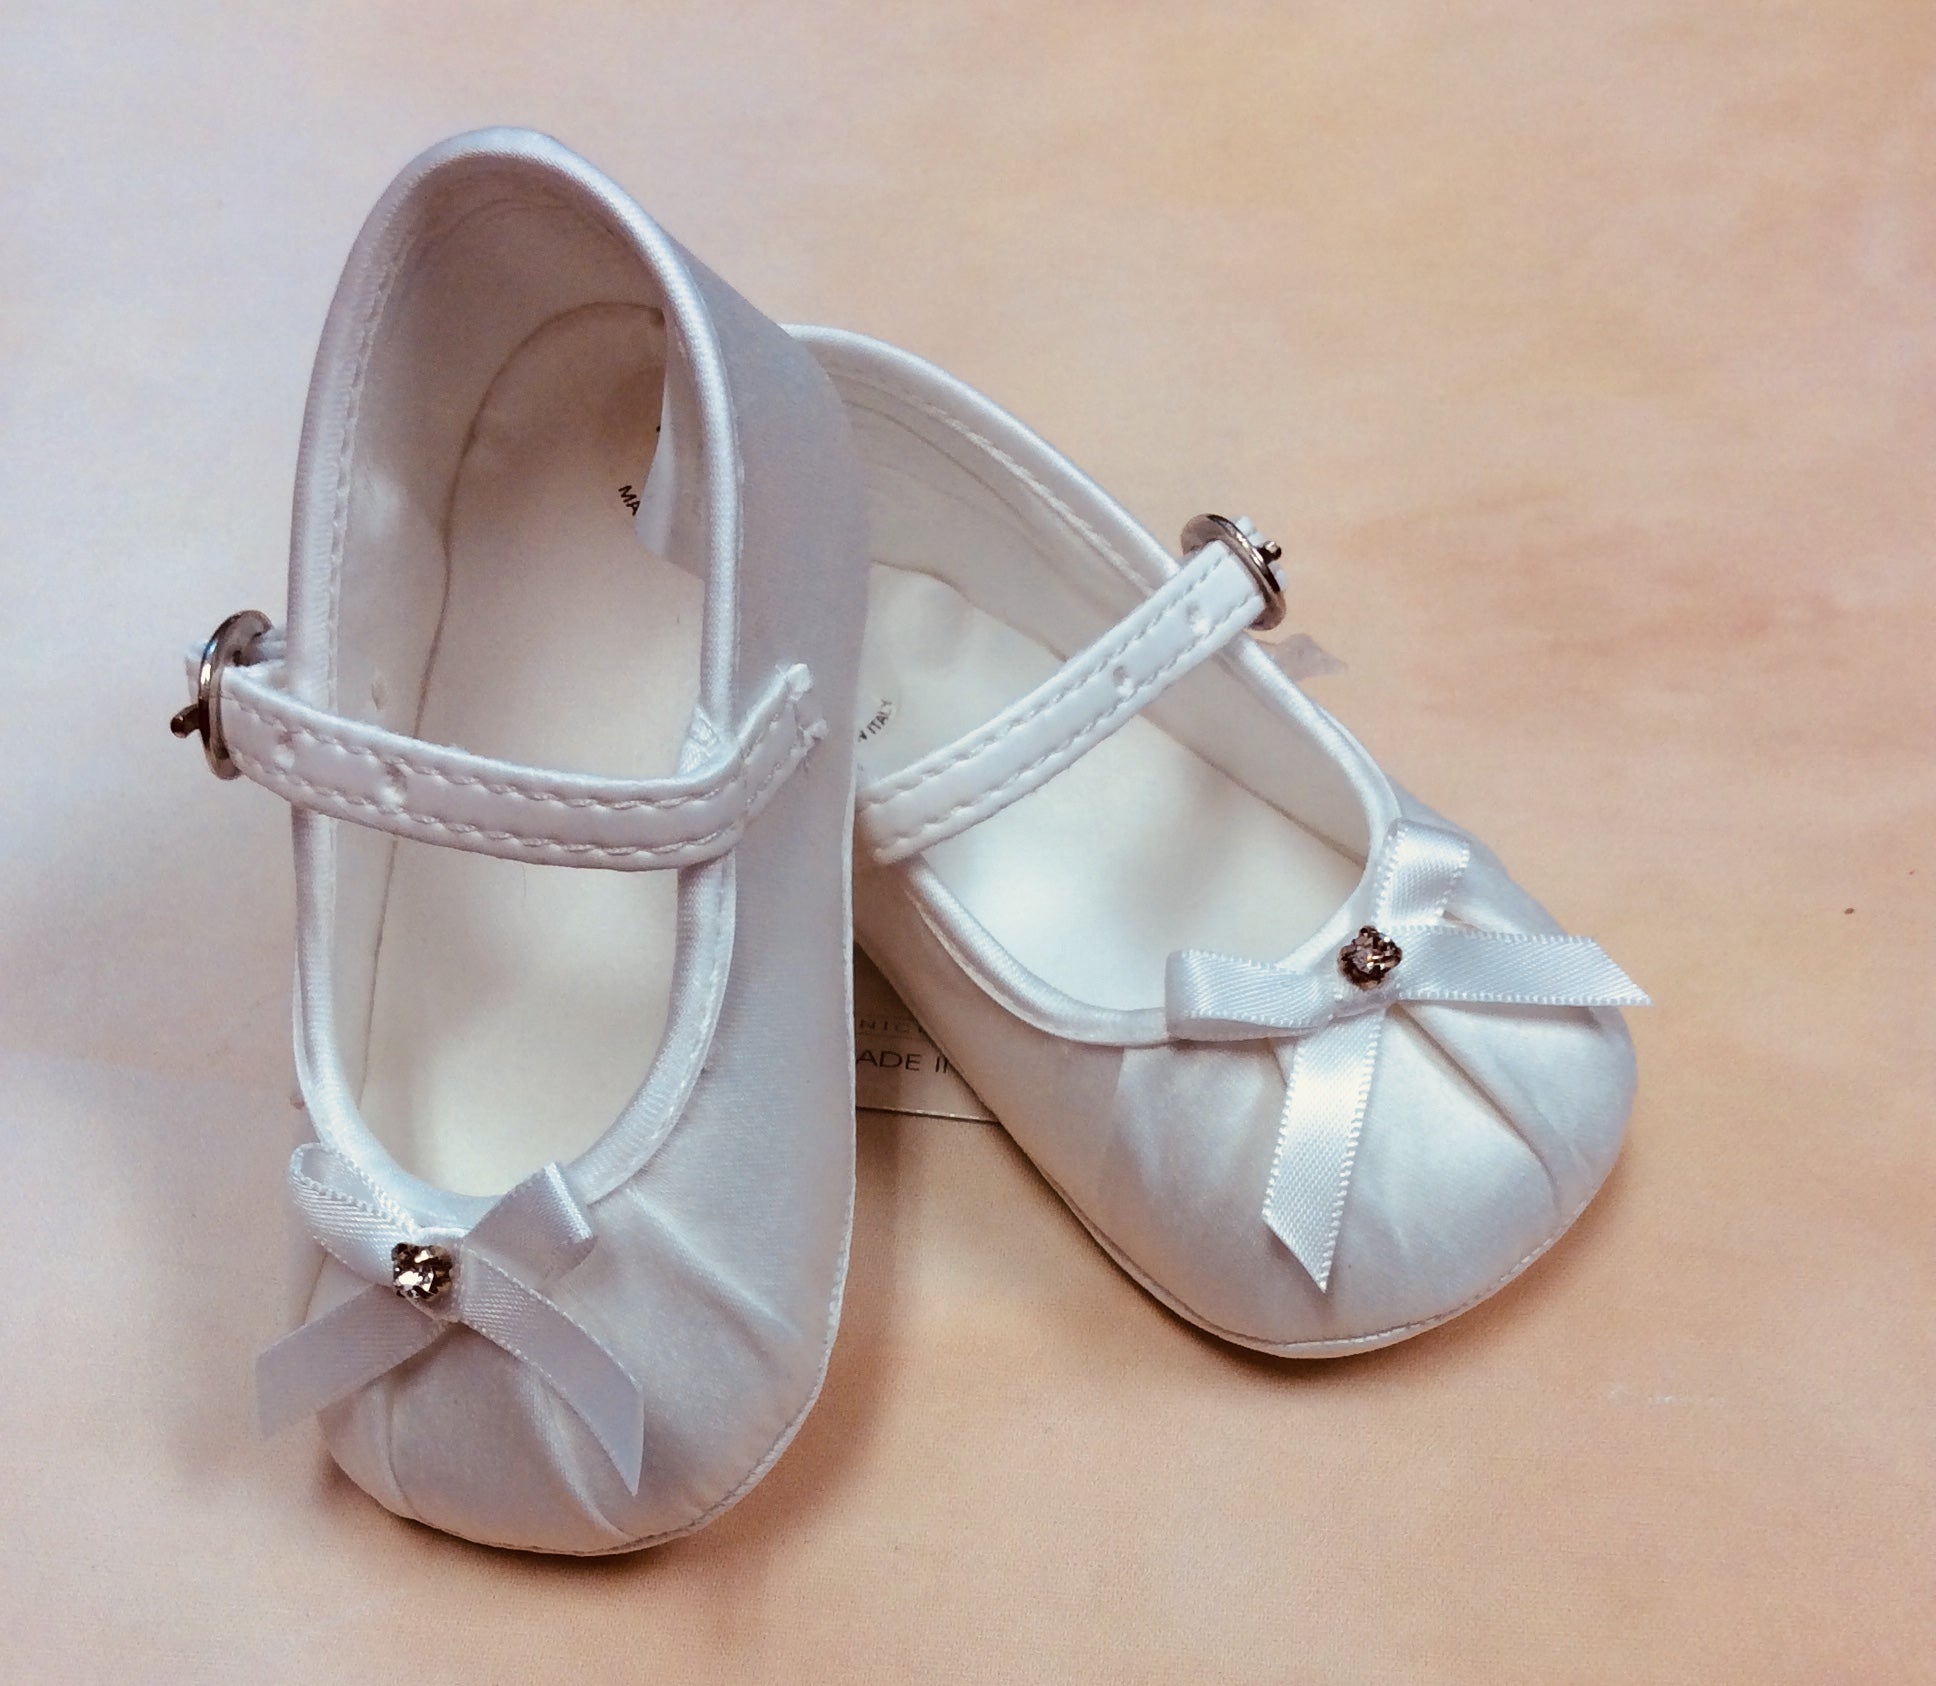 SF2901/T0028 Eggshell Christening mary jane shoes with rhinestone center-Nenes Lullaby Boutique Inc-Nenes Lullaby Boutique Inc